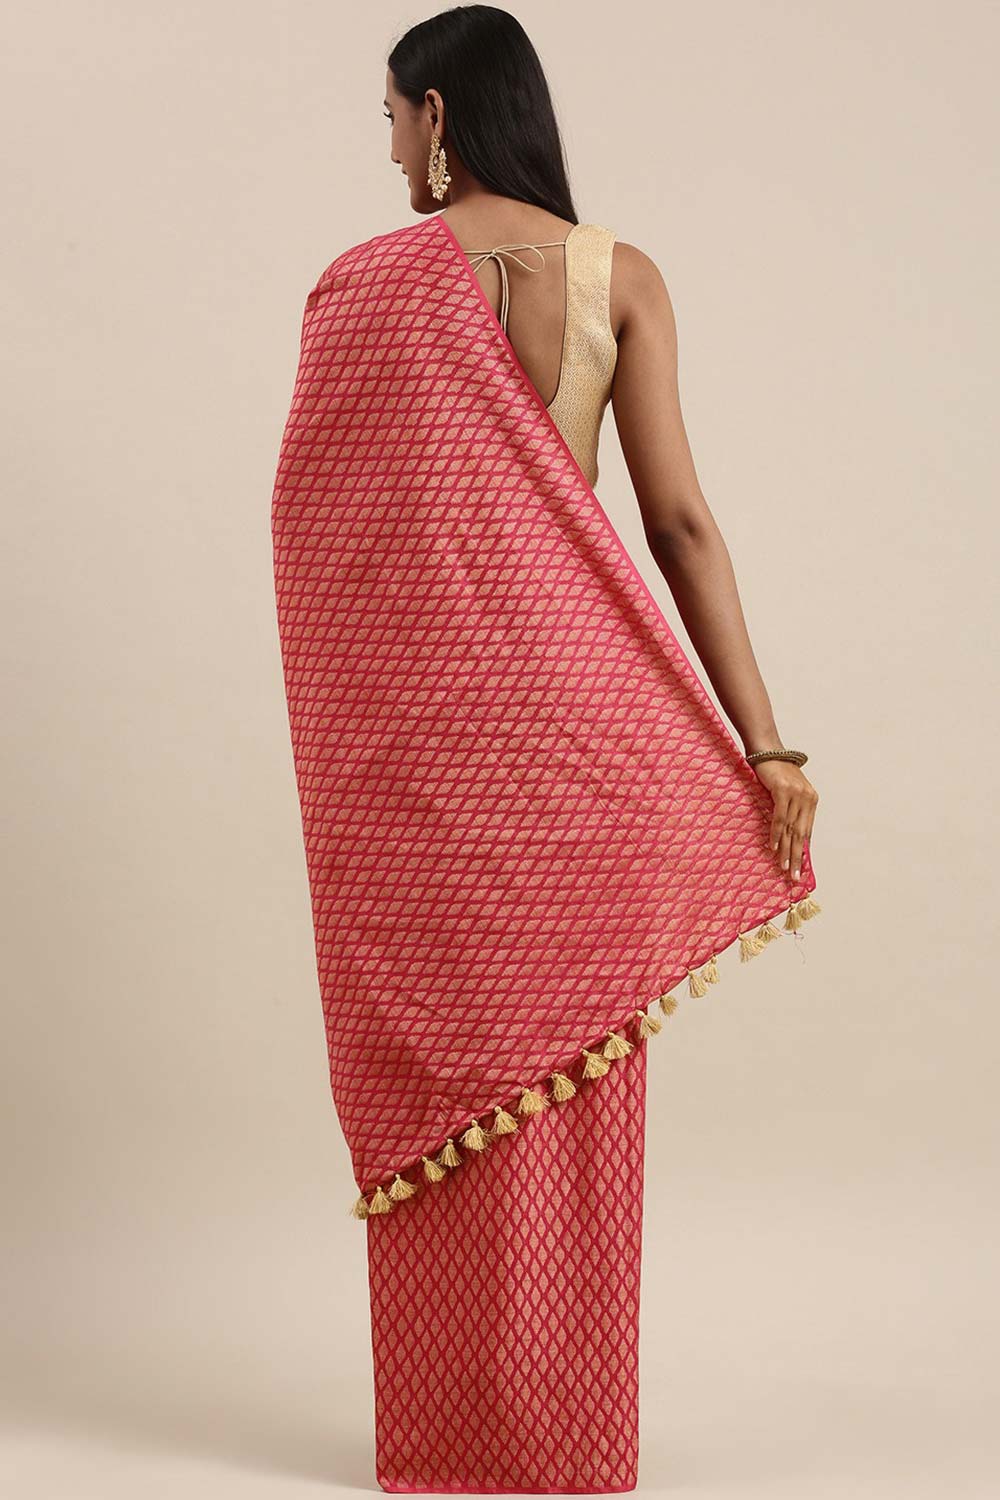 Shop Jeera Pink Silk Blend Woven One Minute Saree at best offer at our  Store - One Minute Saree